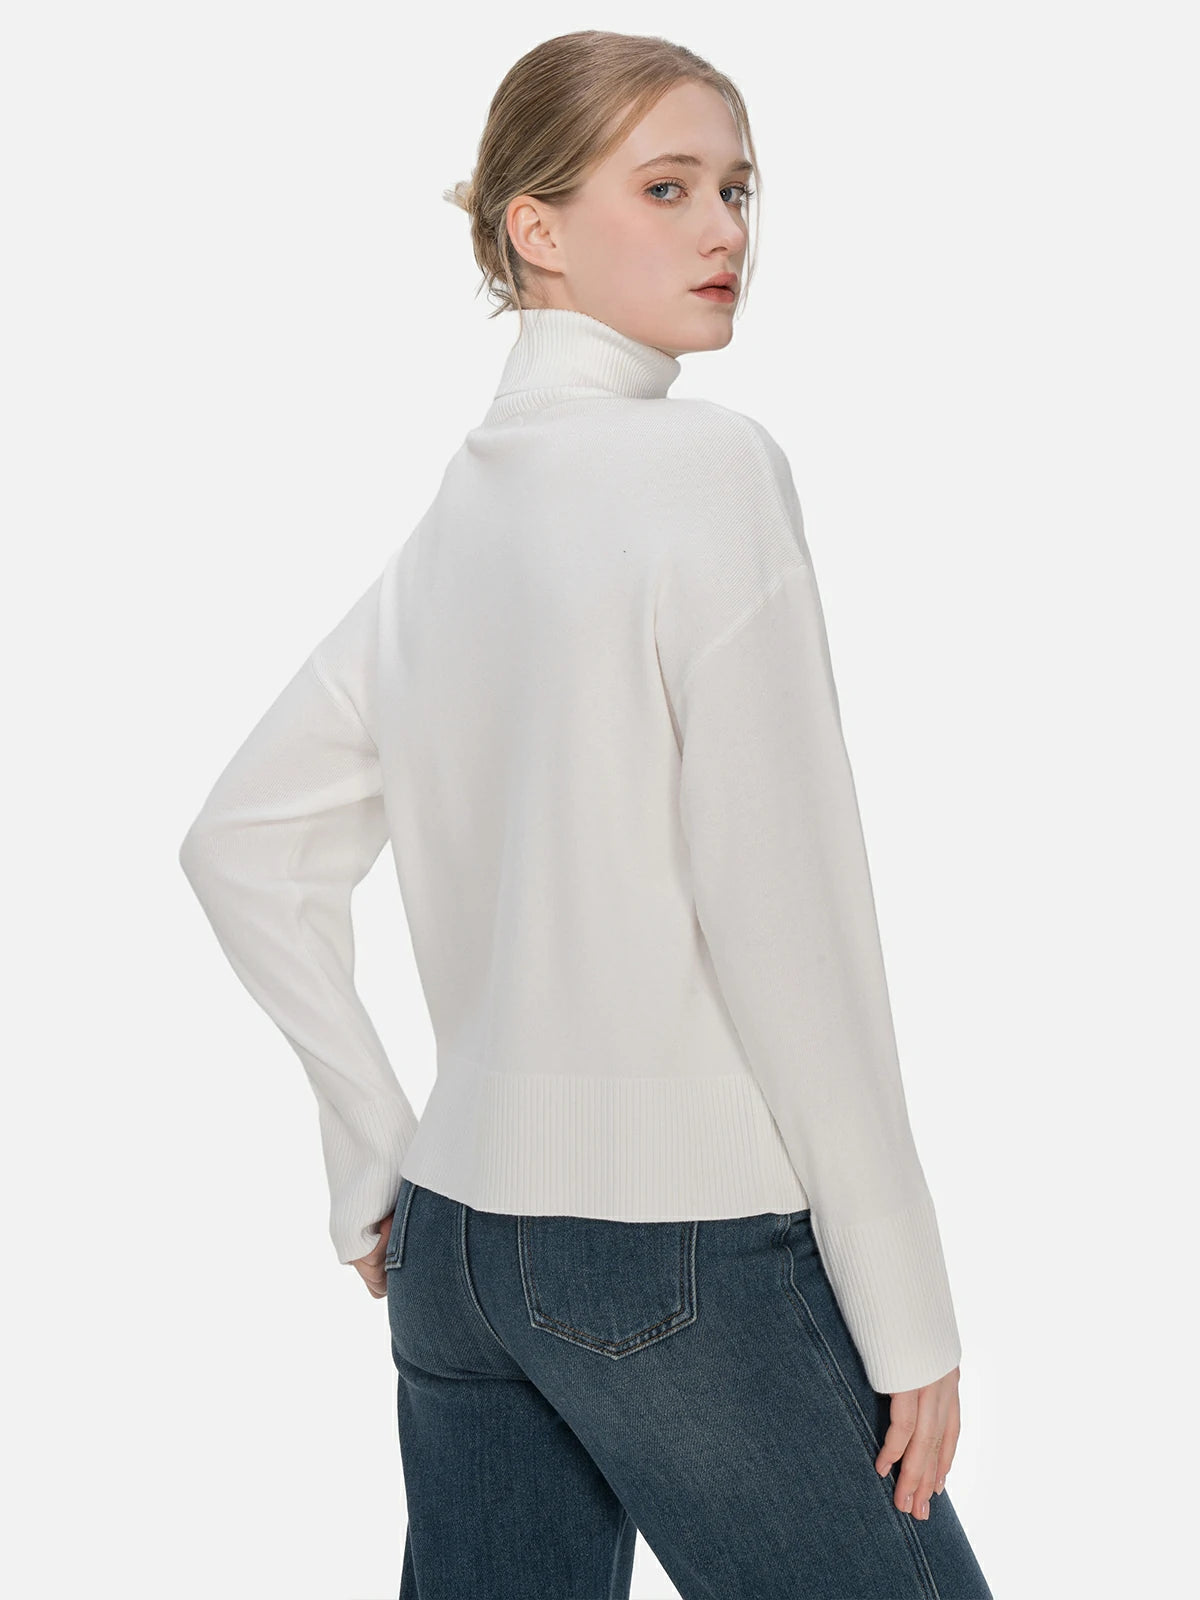 Discover the perfect blend of comfort and style in this white turtleneck sweater, featuring an intricate knit texture and a snug fit.